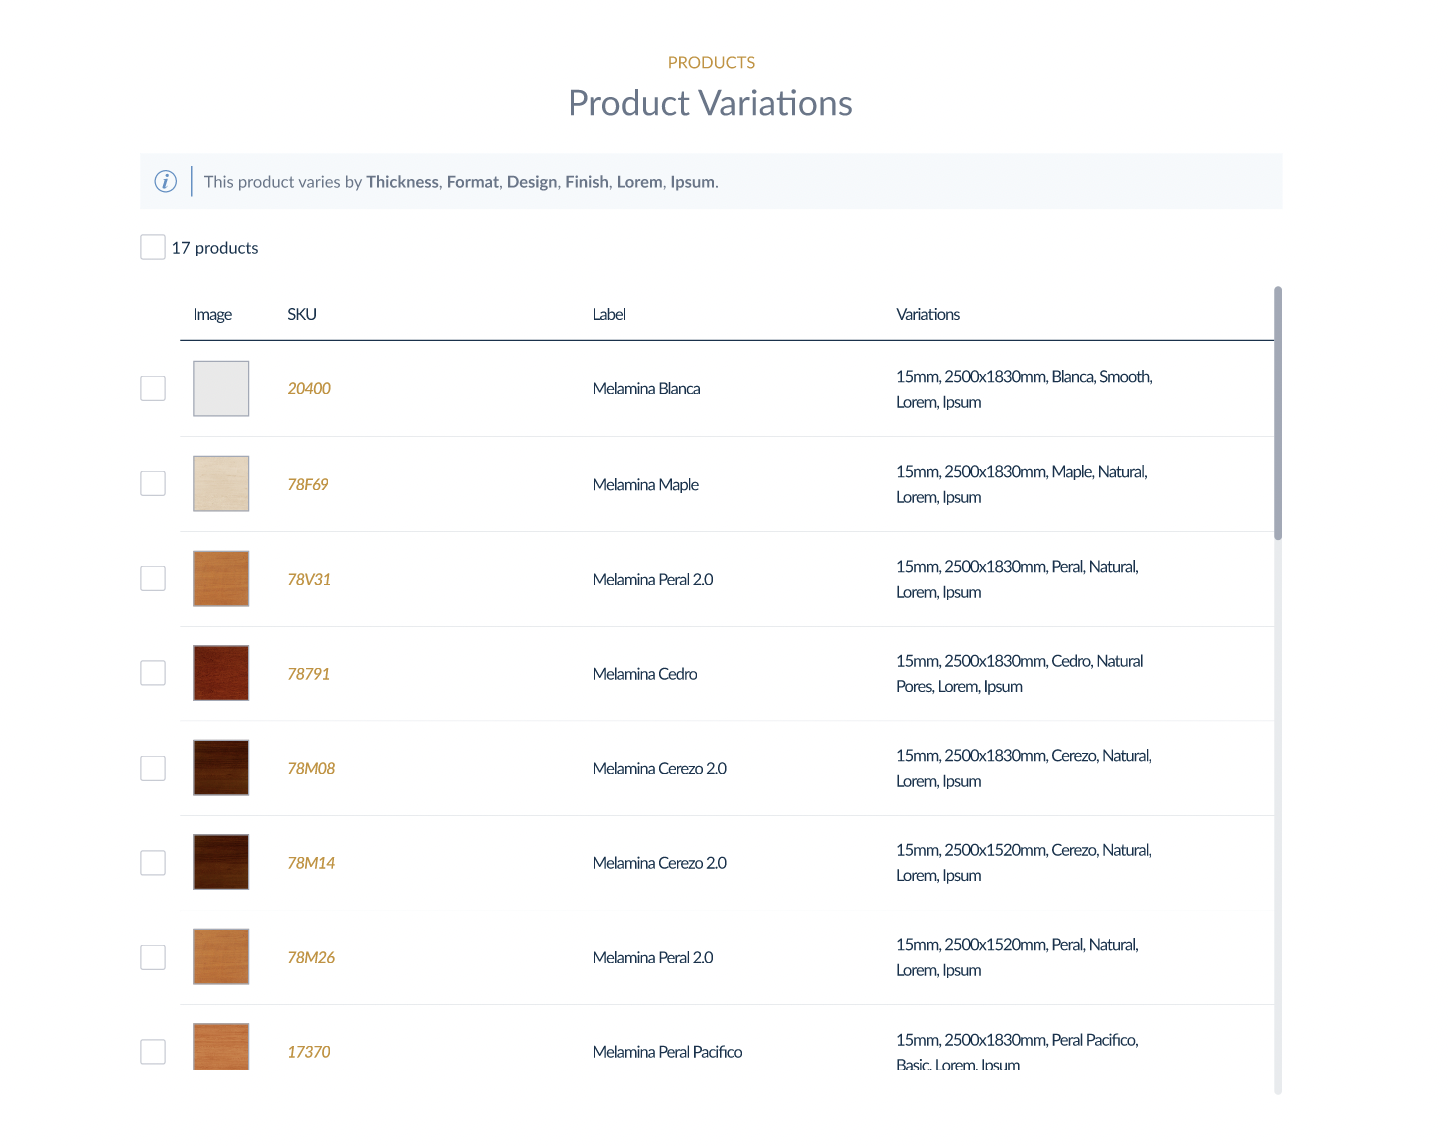 View Product Variations in Shared Catalogs